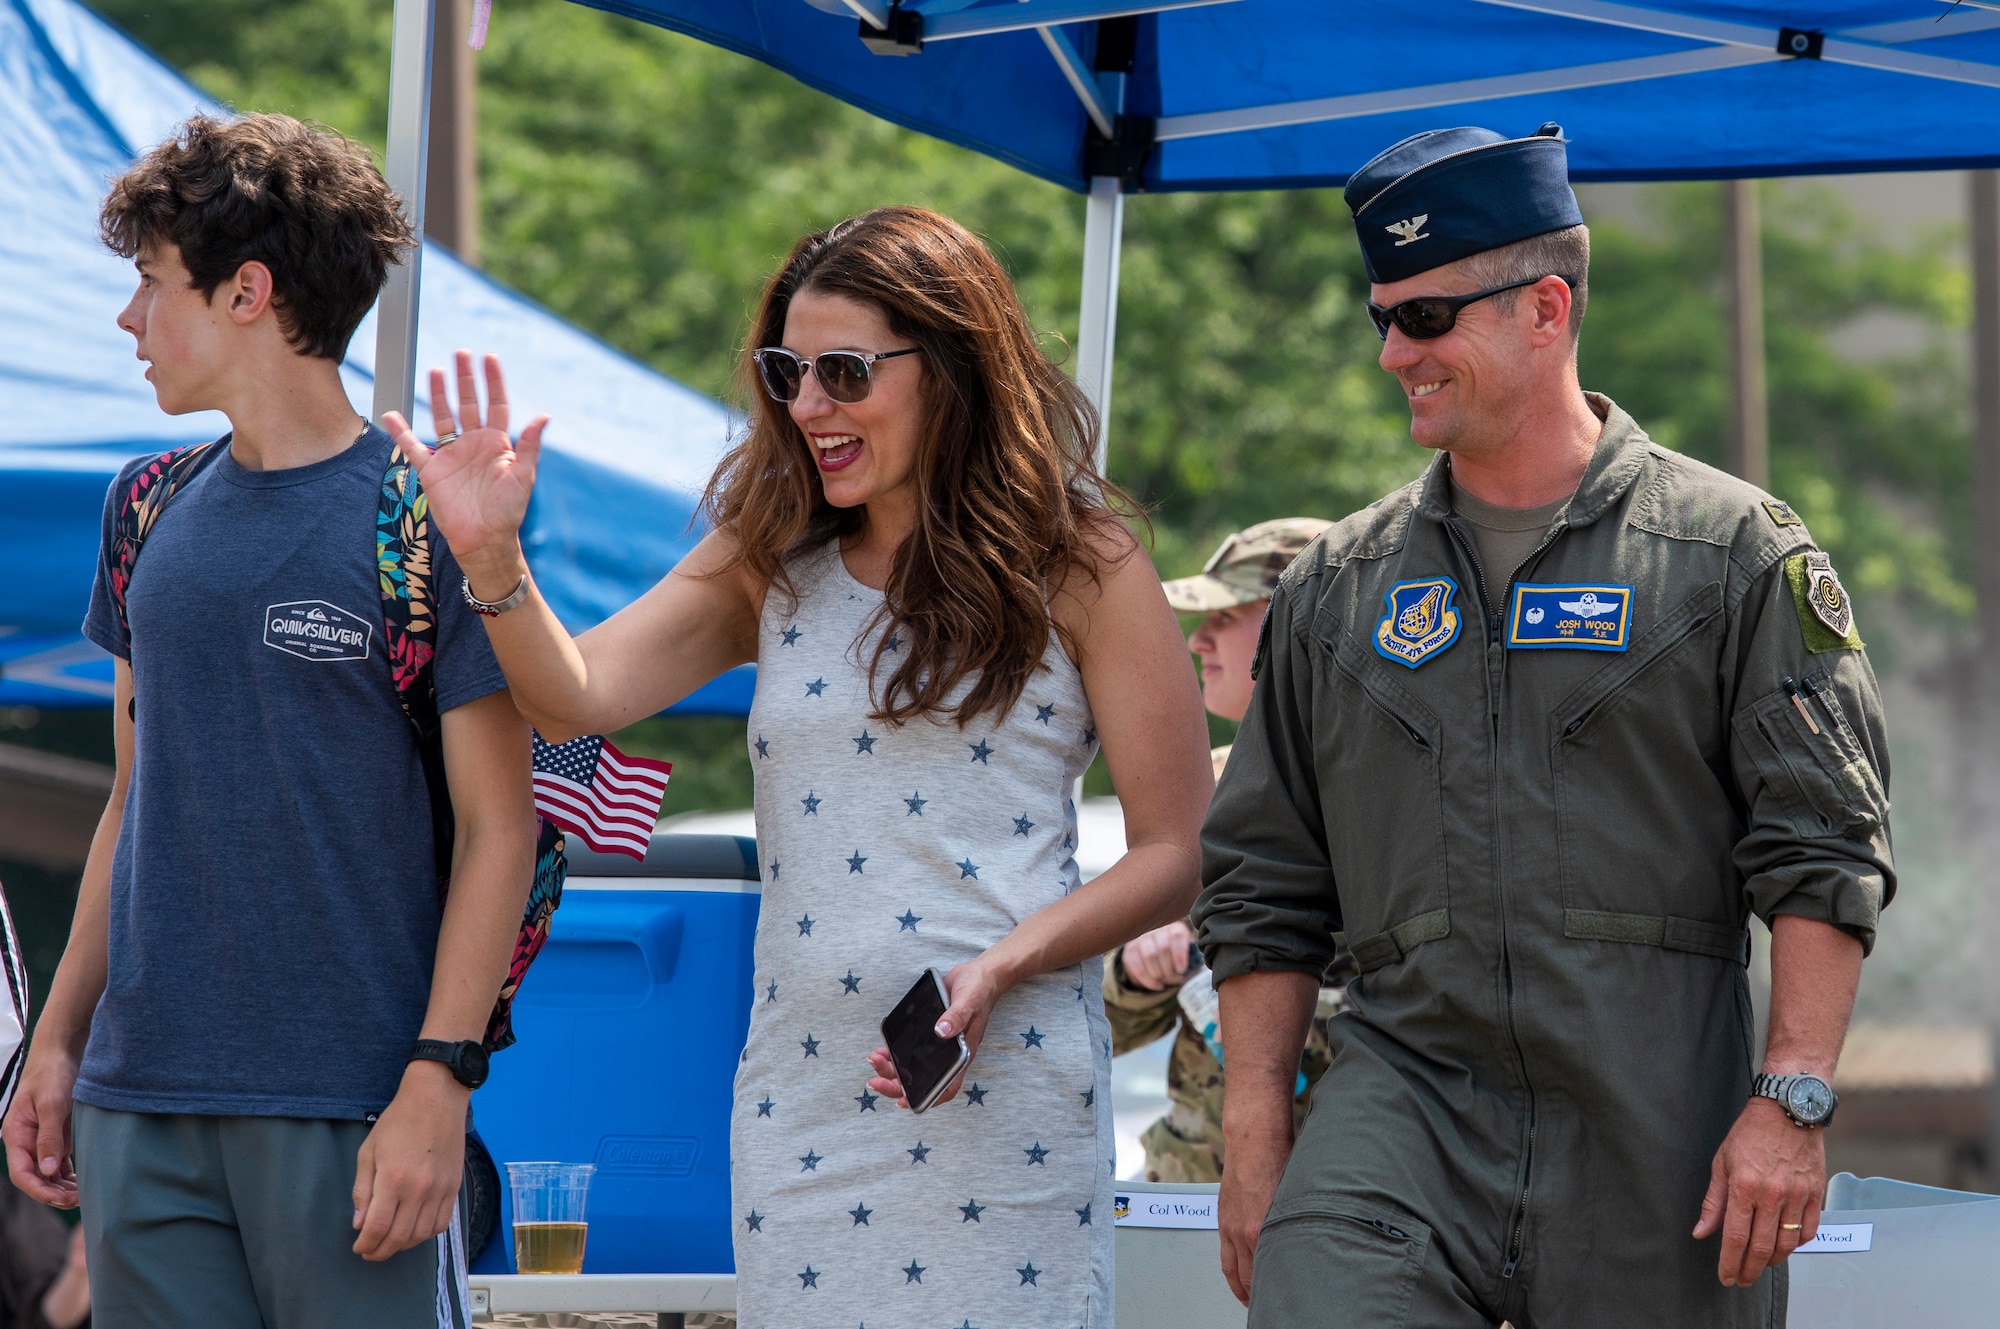 Col. Joshua Wood, 51st Fighter Wing commander, wife Bonnie and son stand  during a parade.